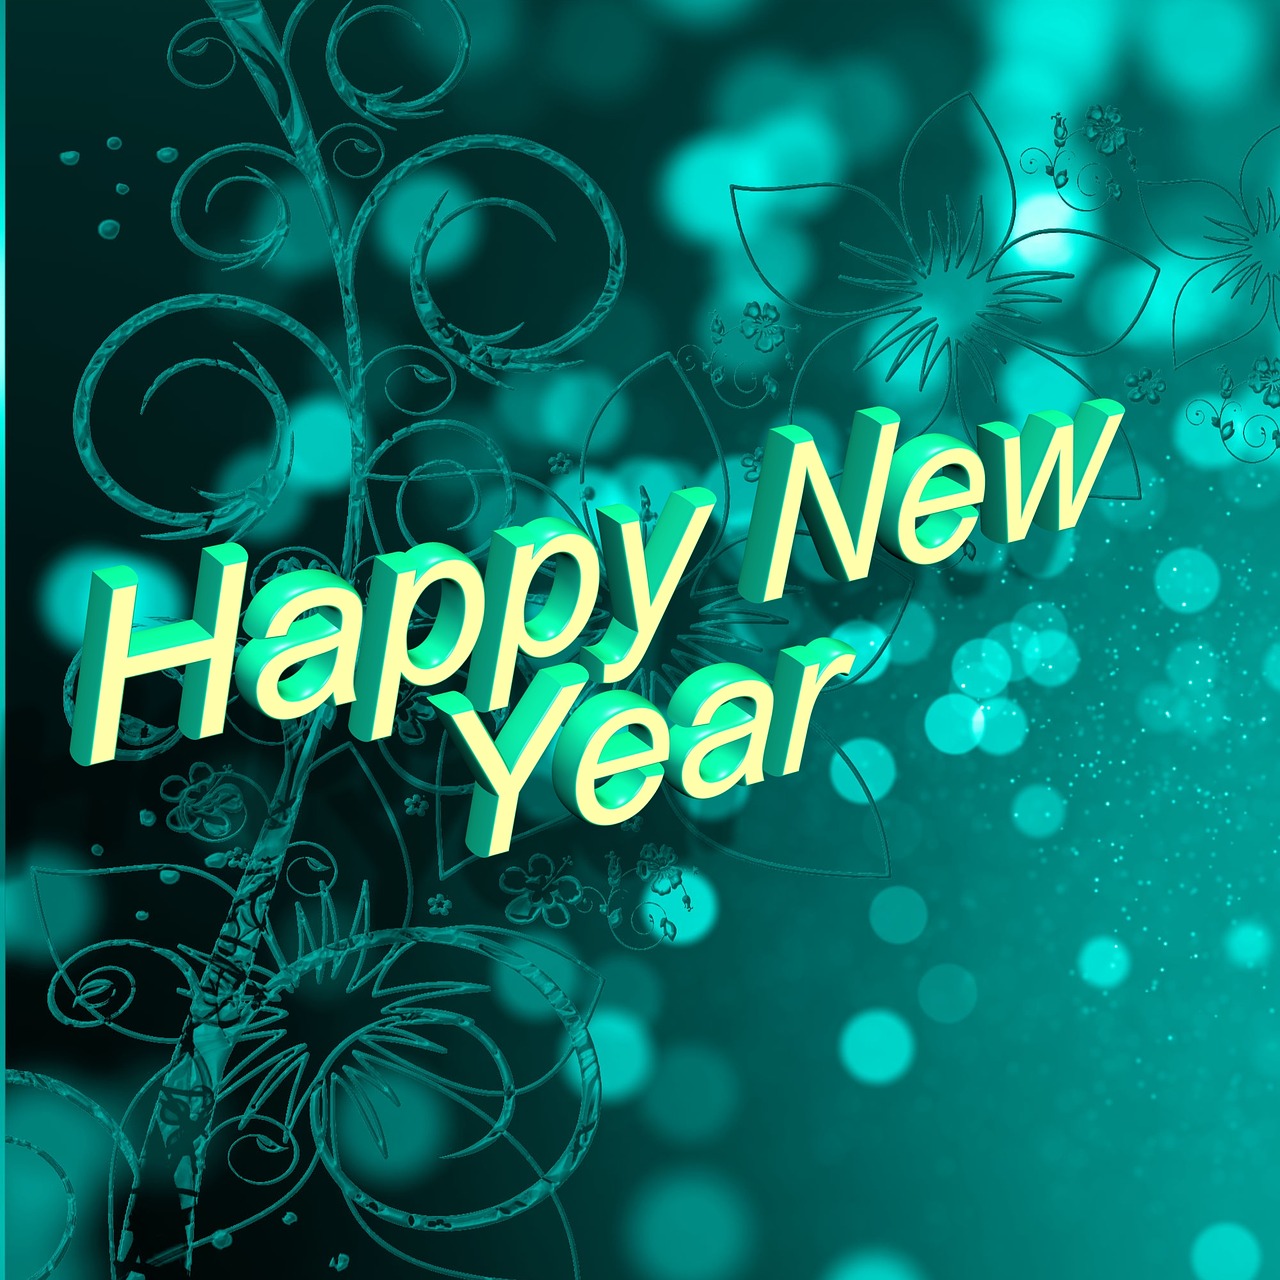 font lettering happy new year free photo